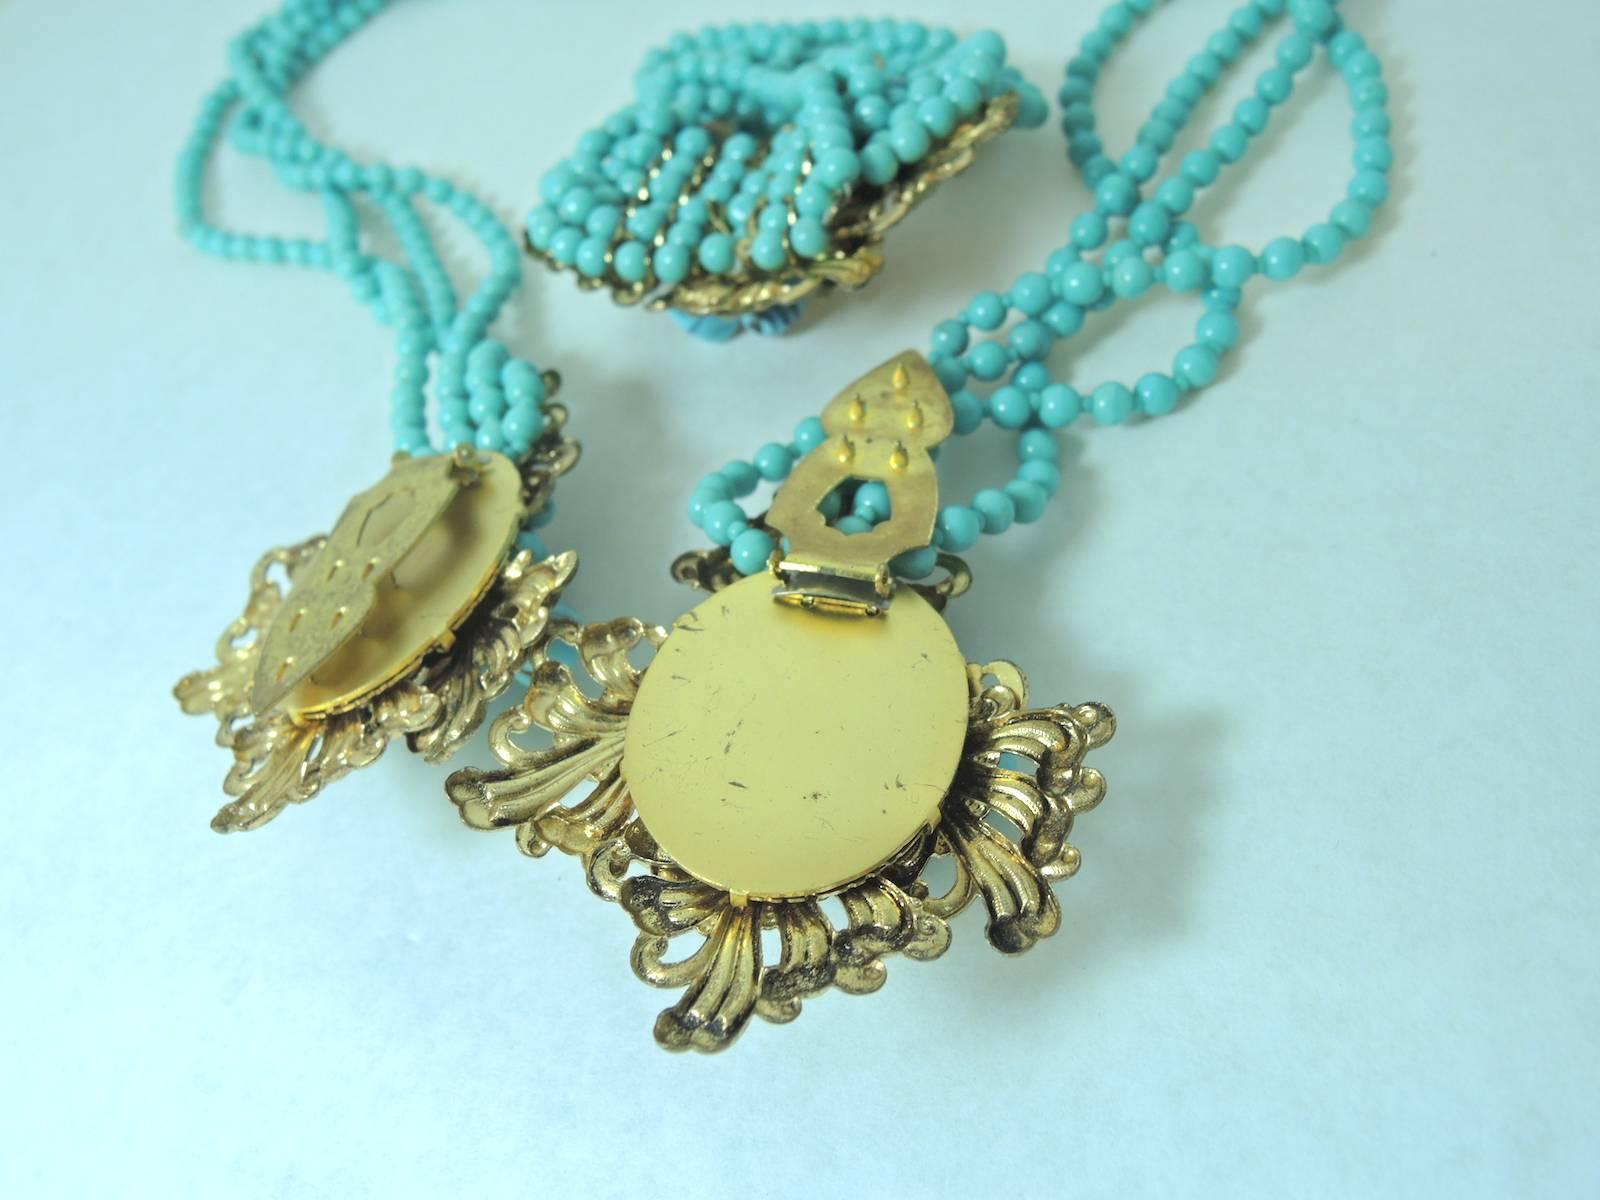 Women's Vintage 1930s Early Miriam Haskell Faux Turquoise Lariat Necklace & Bracelet Set